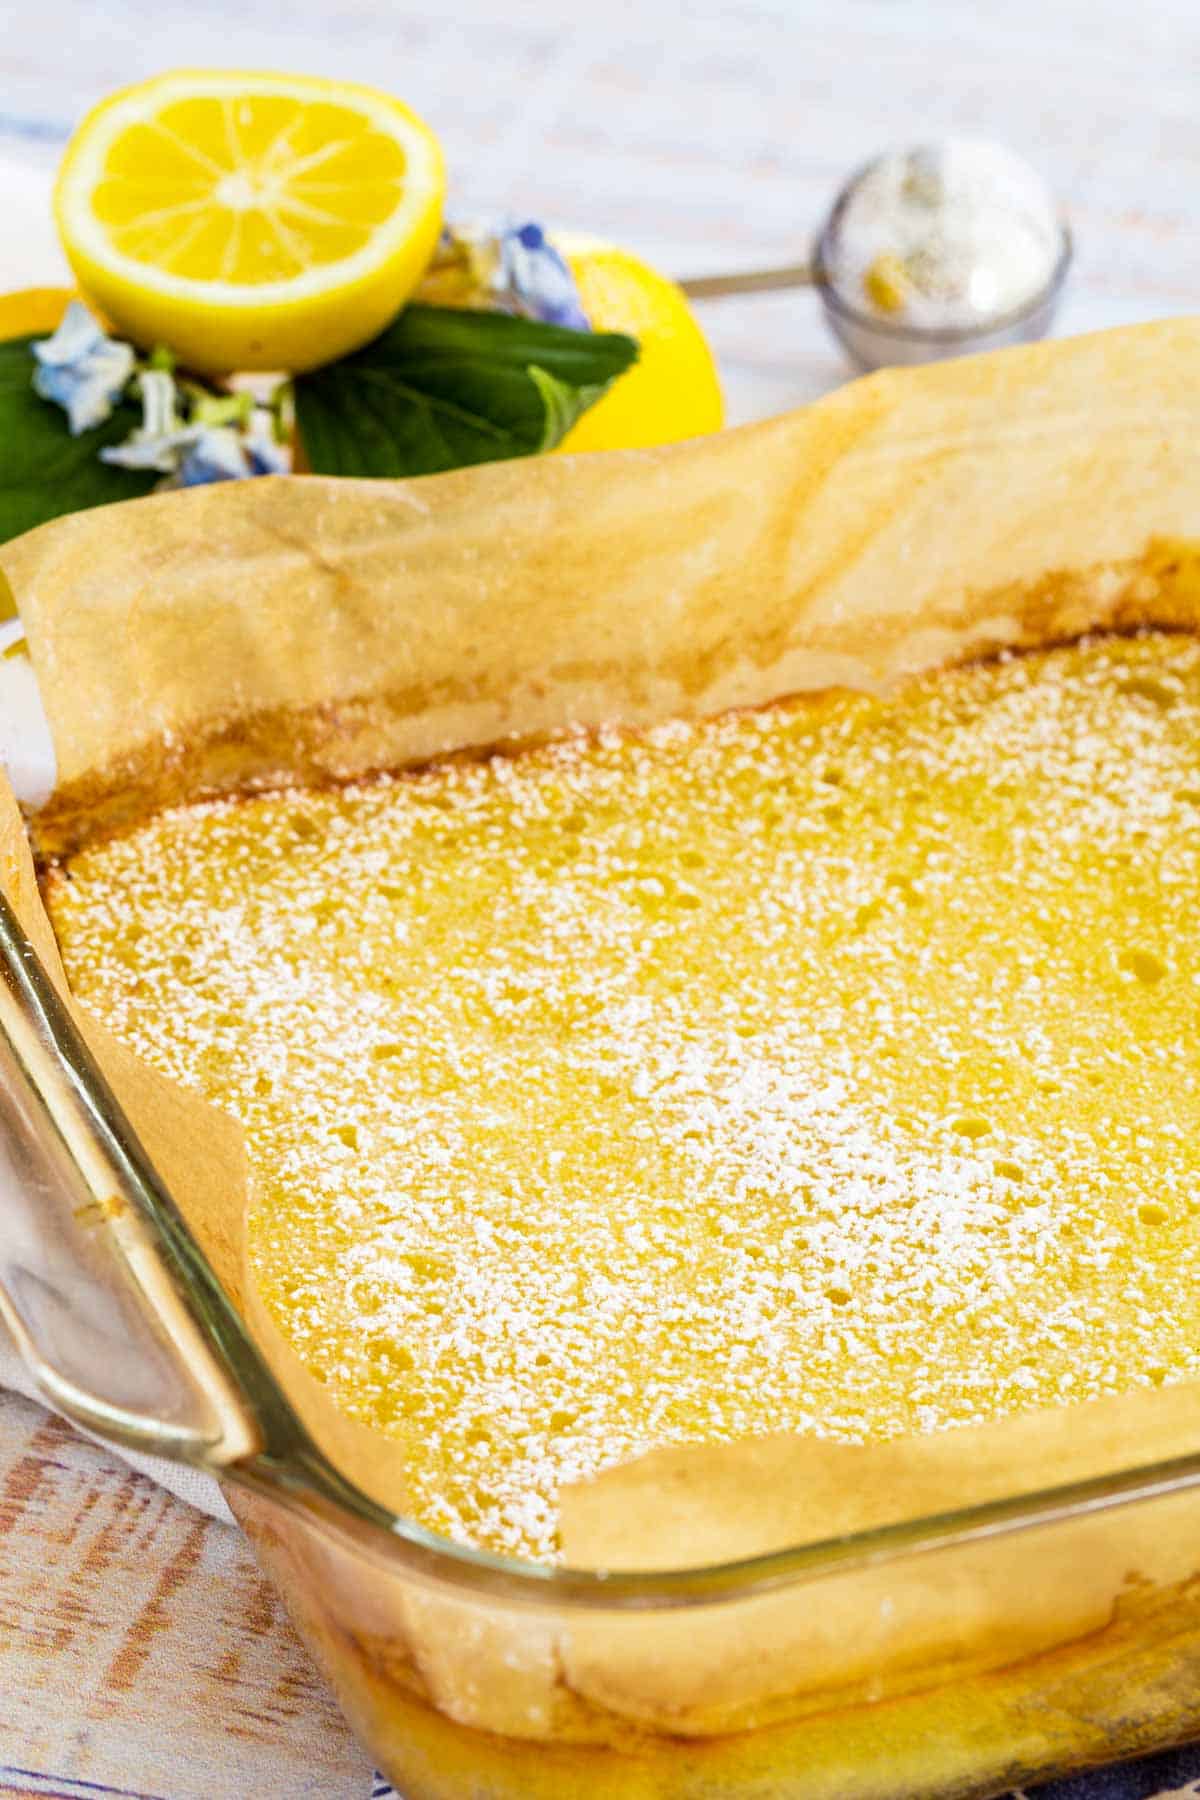 Gluten free lemon bars in a baking dish, dusted with powdered sugar with lemons in the background.